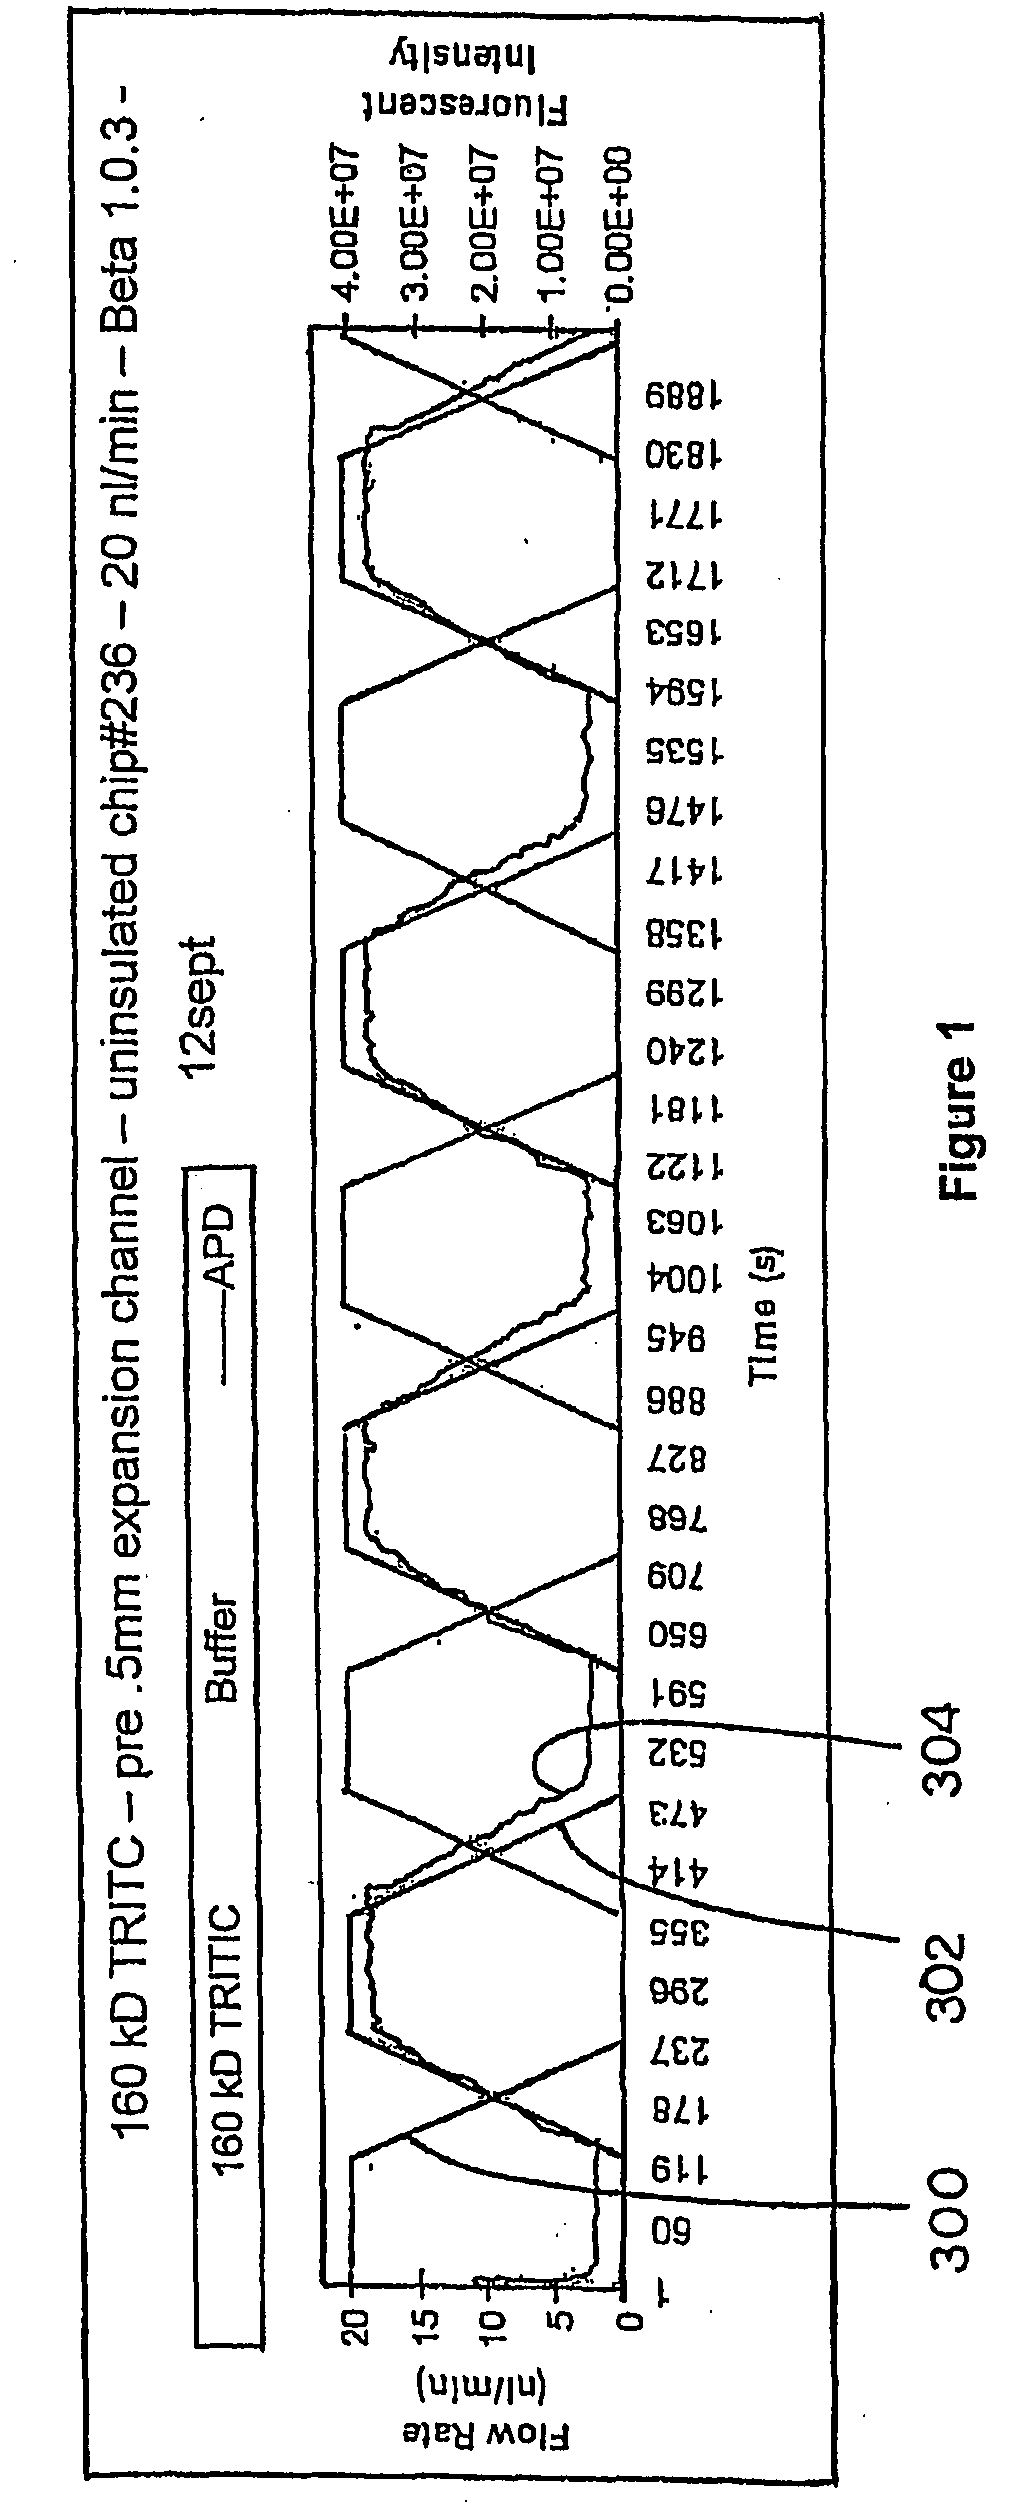 Methods for measuring biochemical reactions